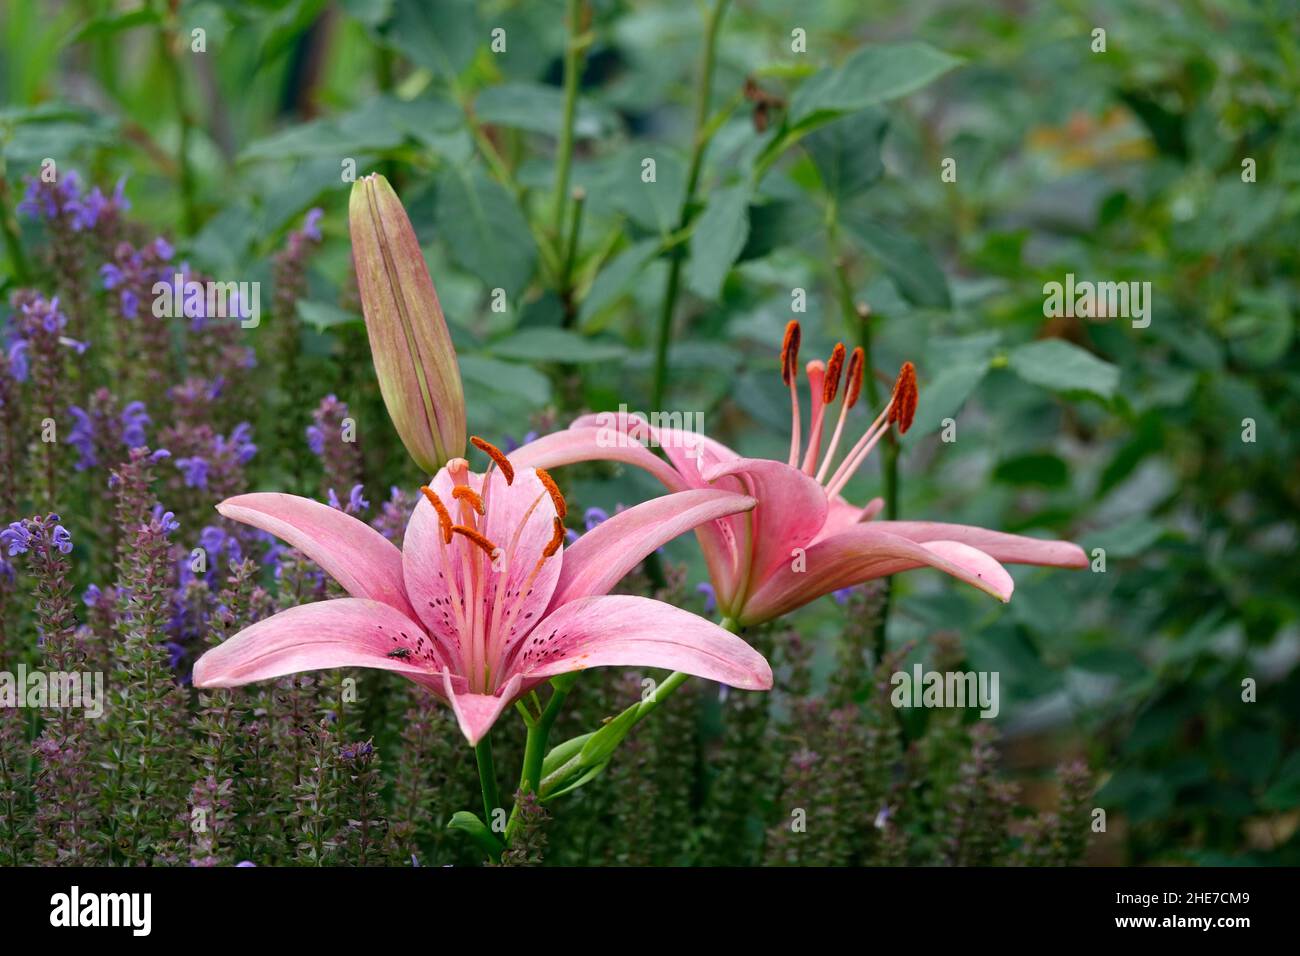 Pink Lilies Flowers, Asiatic Lilies, Hybrid Lily with Dark Pink Spots on the Petals, among a Lavender Garden Stock Photo